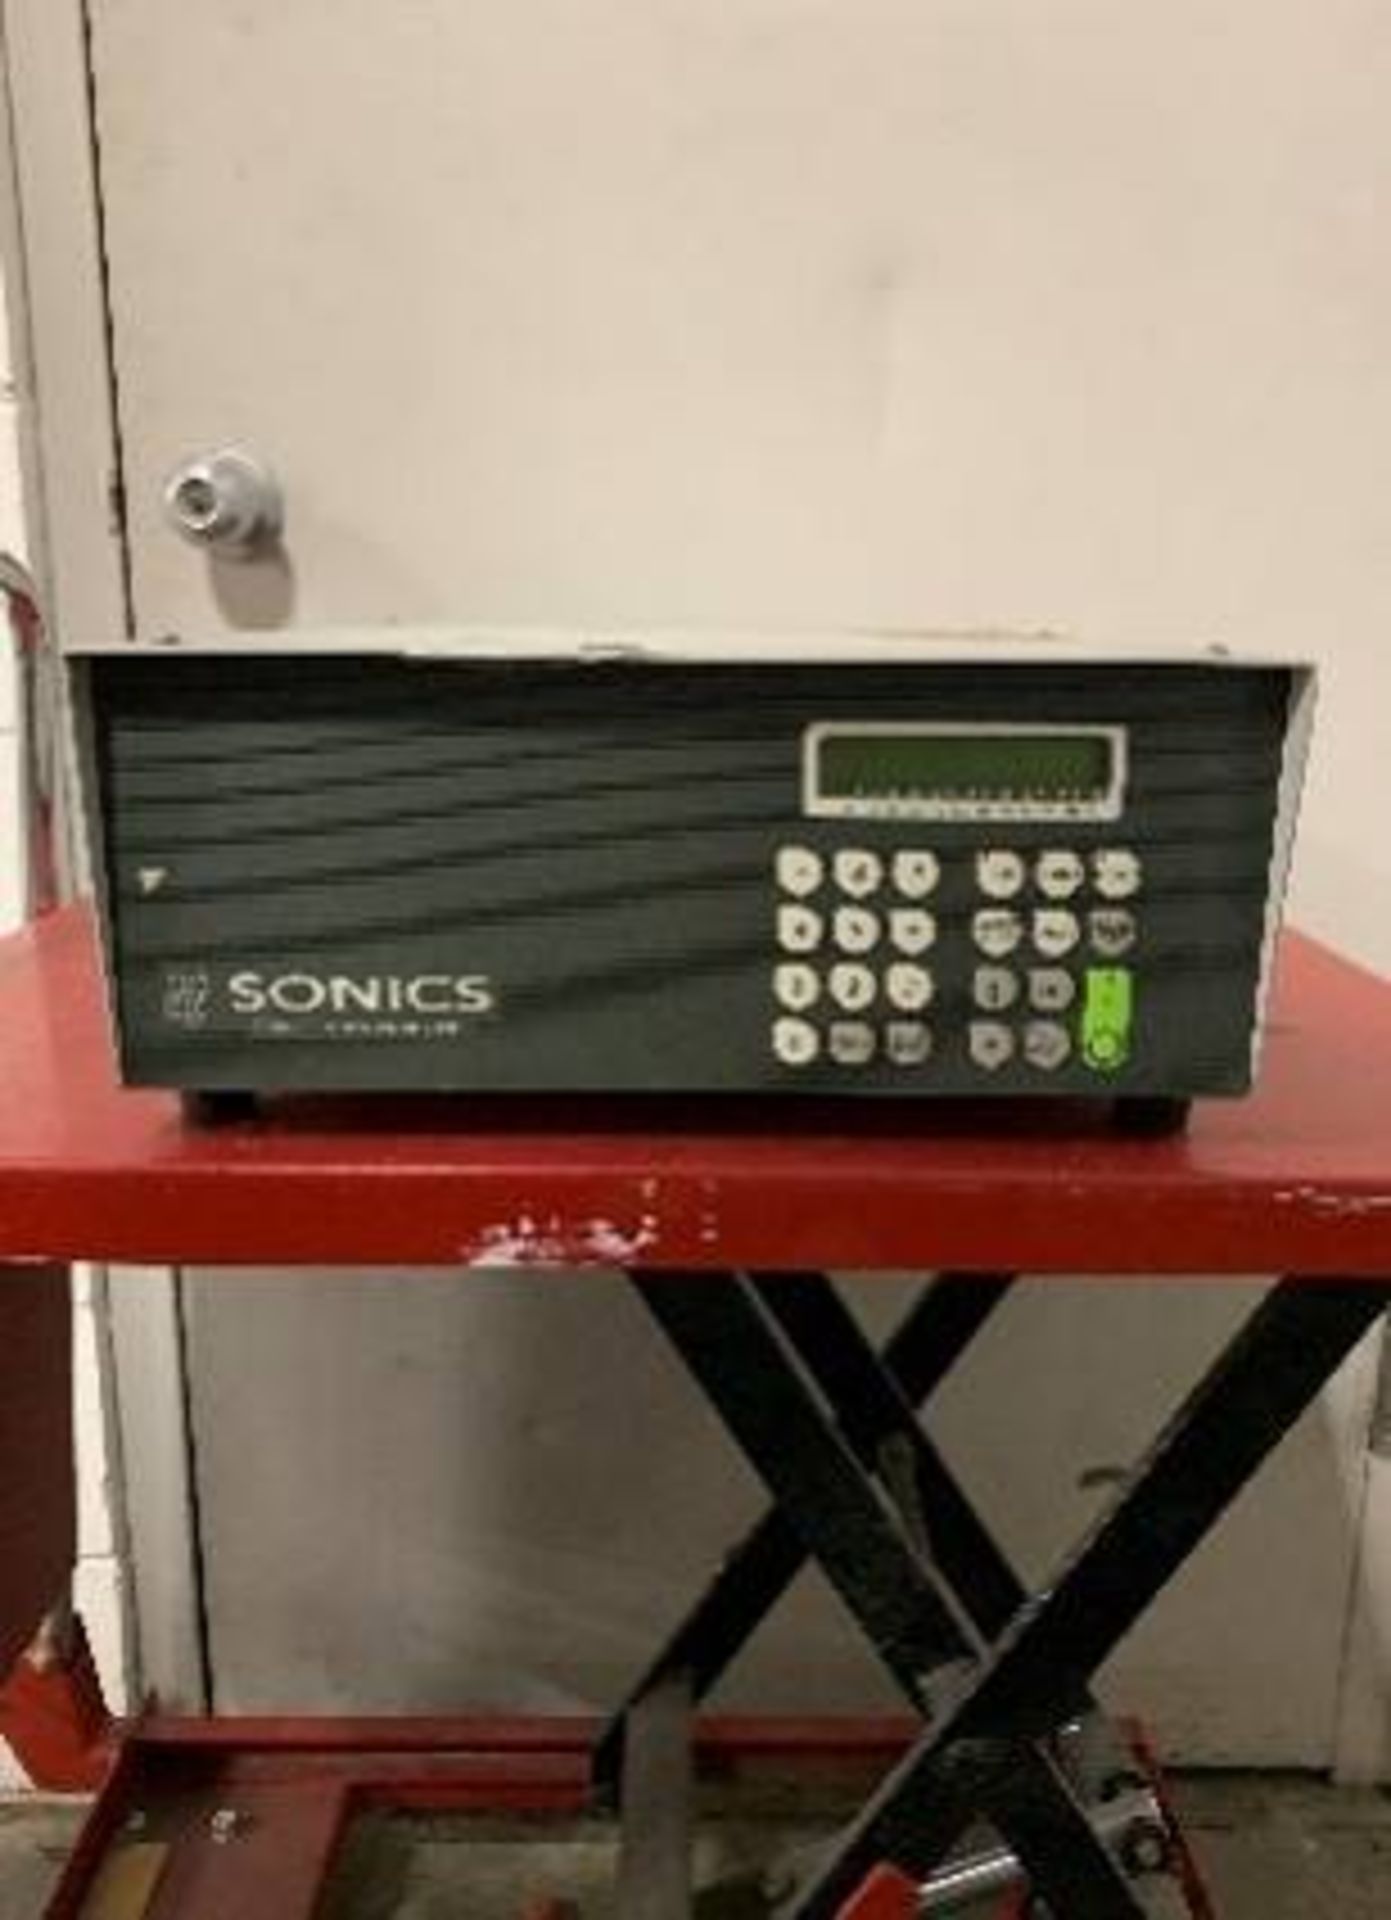 Sonics & Material GXE2200-20 UltraSonic Power Suply